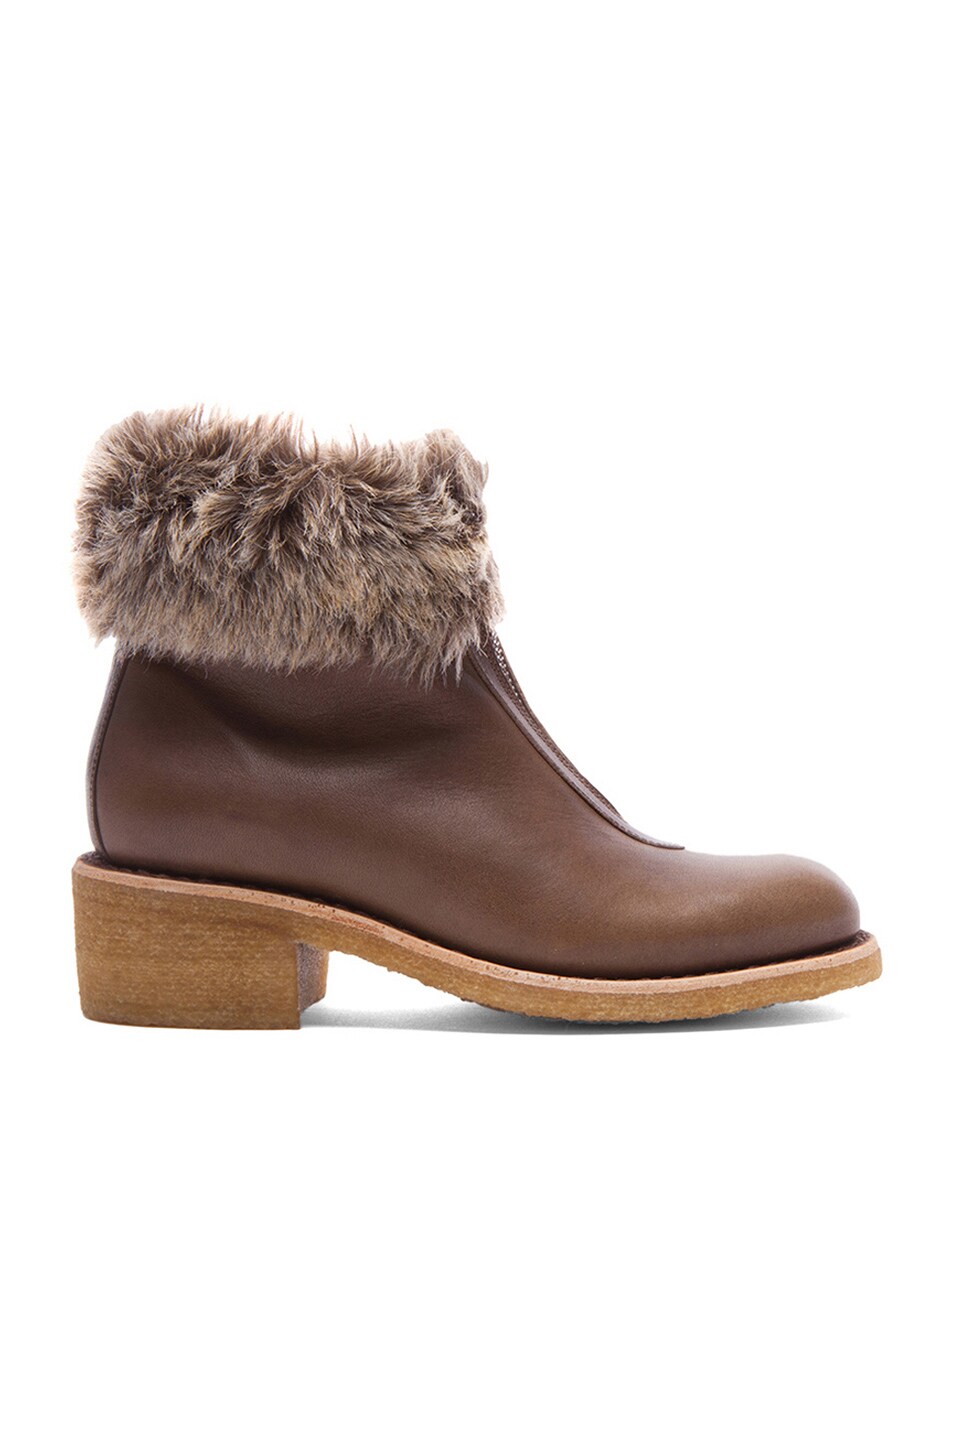 Image 1 of A.P.C. Juneau Fur Leather Boots in Kaki